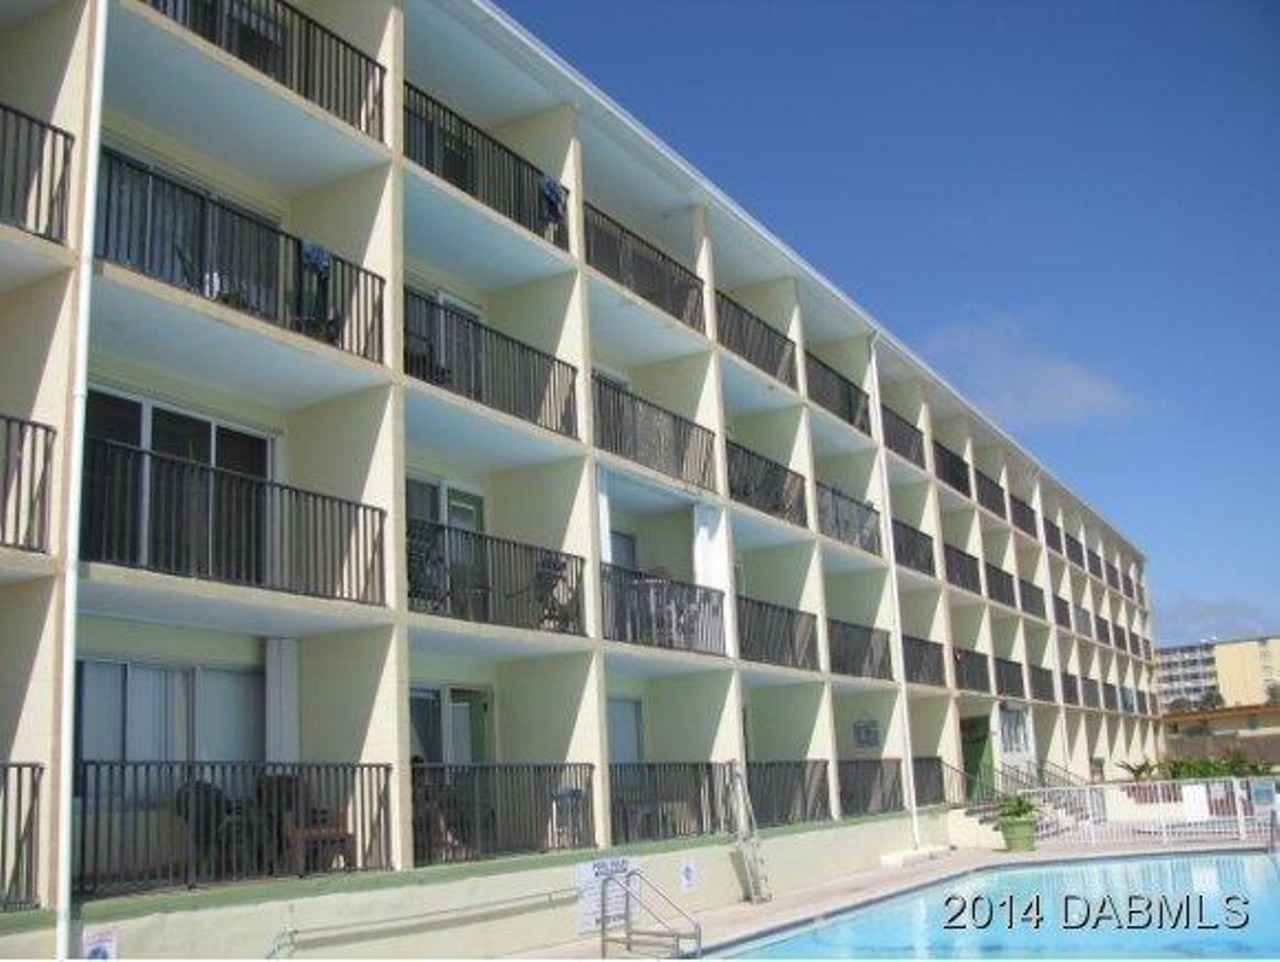 219 S. Atlantic Ave., Daytona Beach
This one is a crazy bargain at just $30,000. It's a "condotel," aka a hotel room for sale.